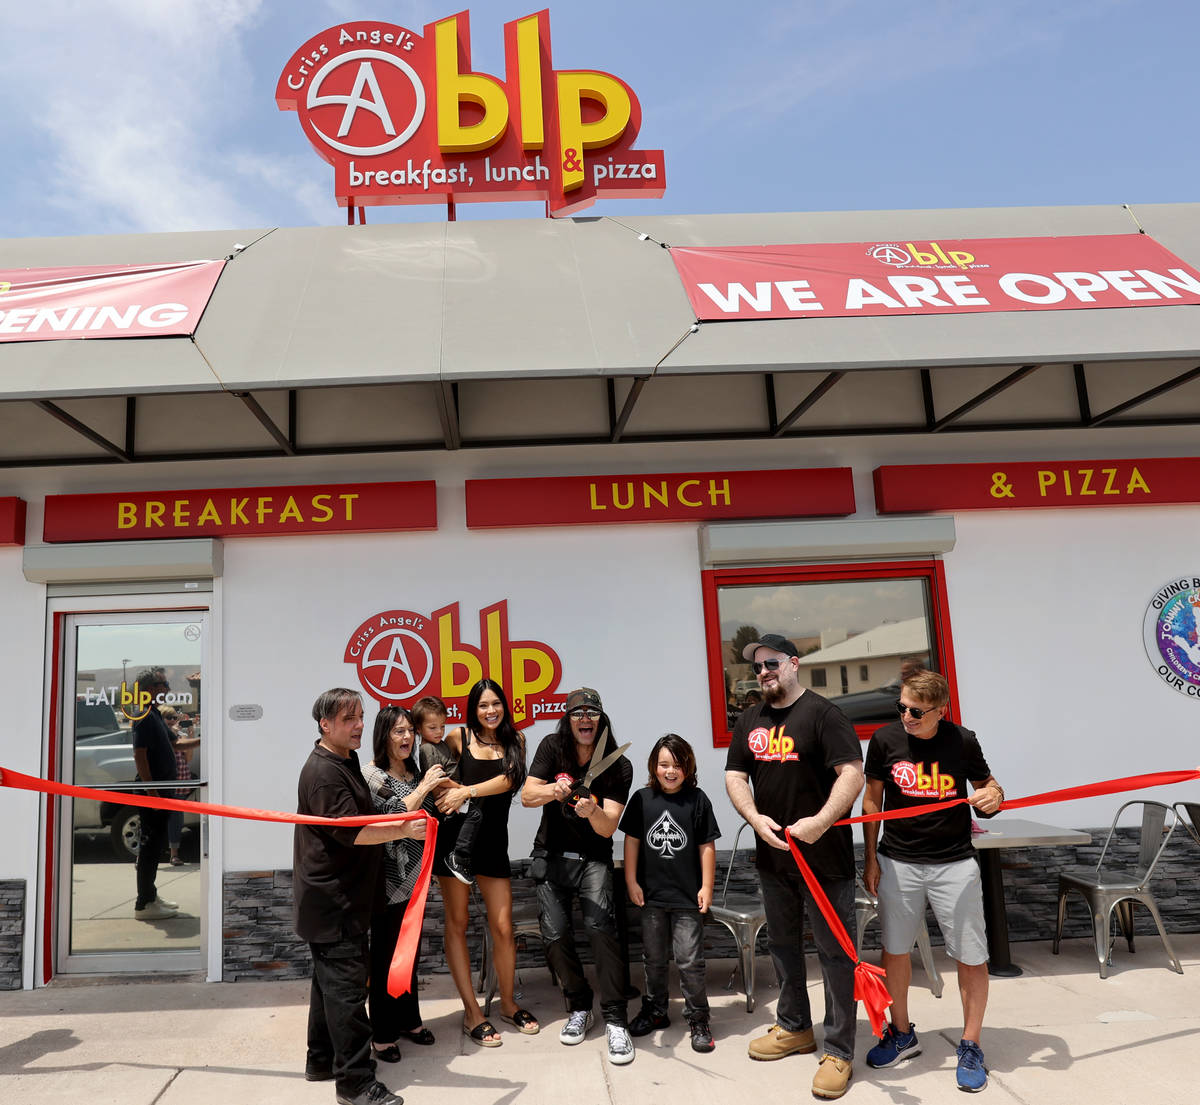 Criss Angel cuts the ribbon at his new restaurant, CABLP, in Overton during the grand opening F ...